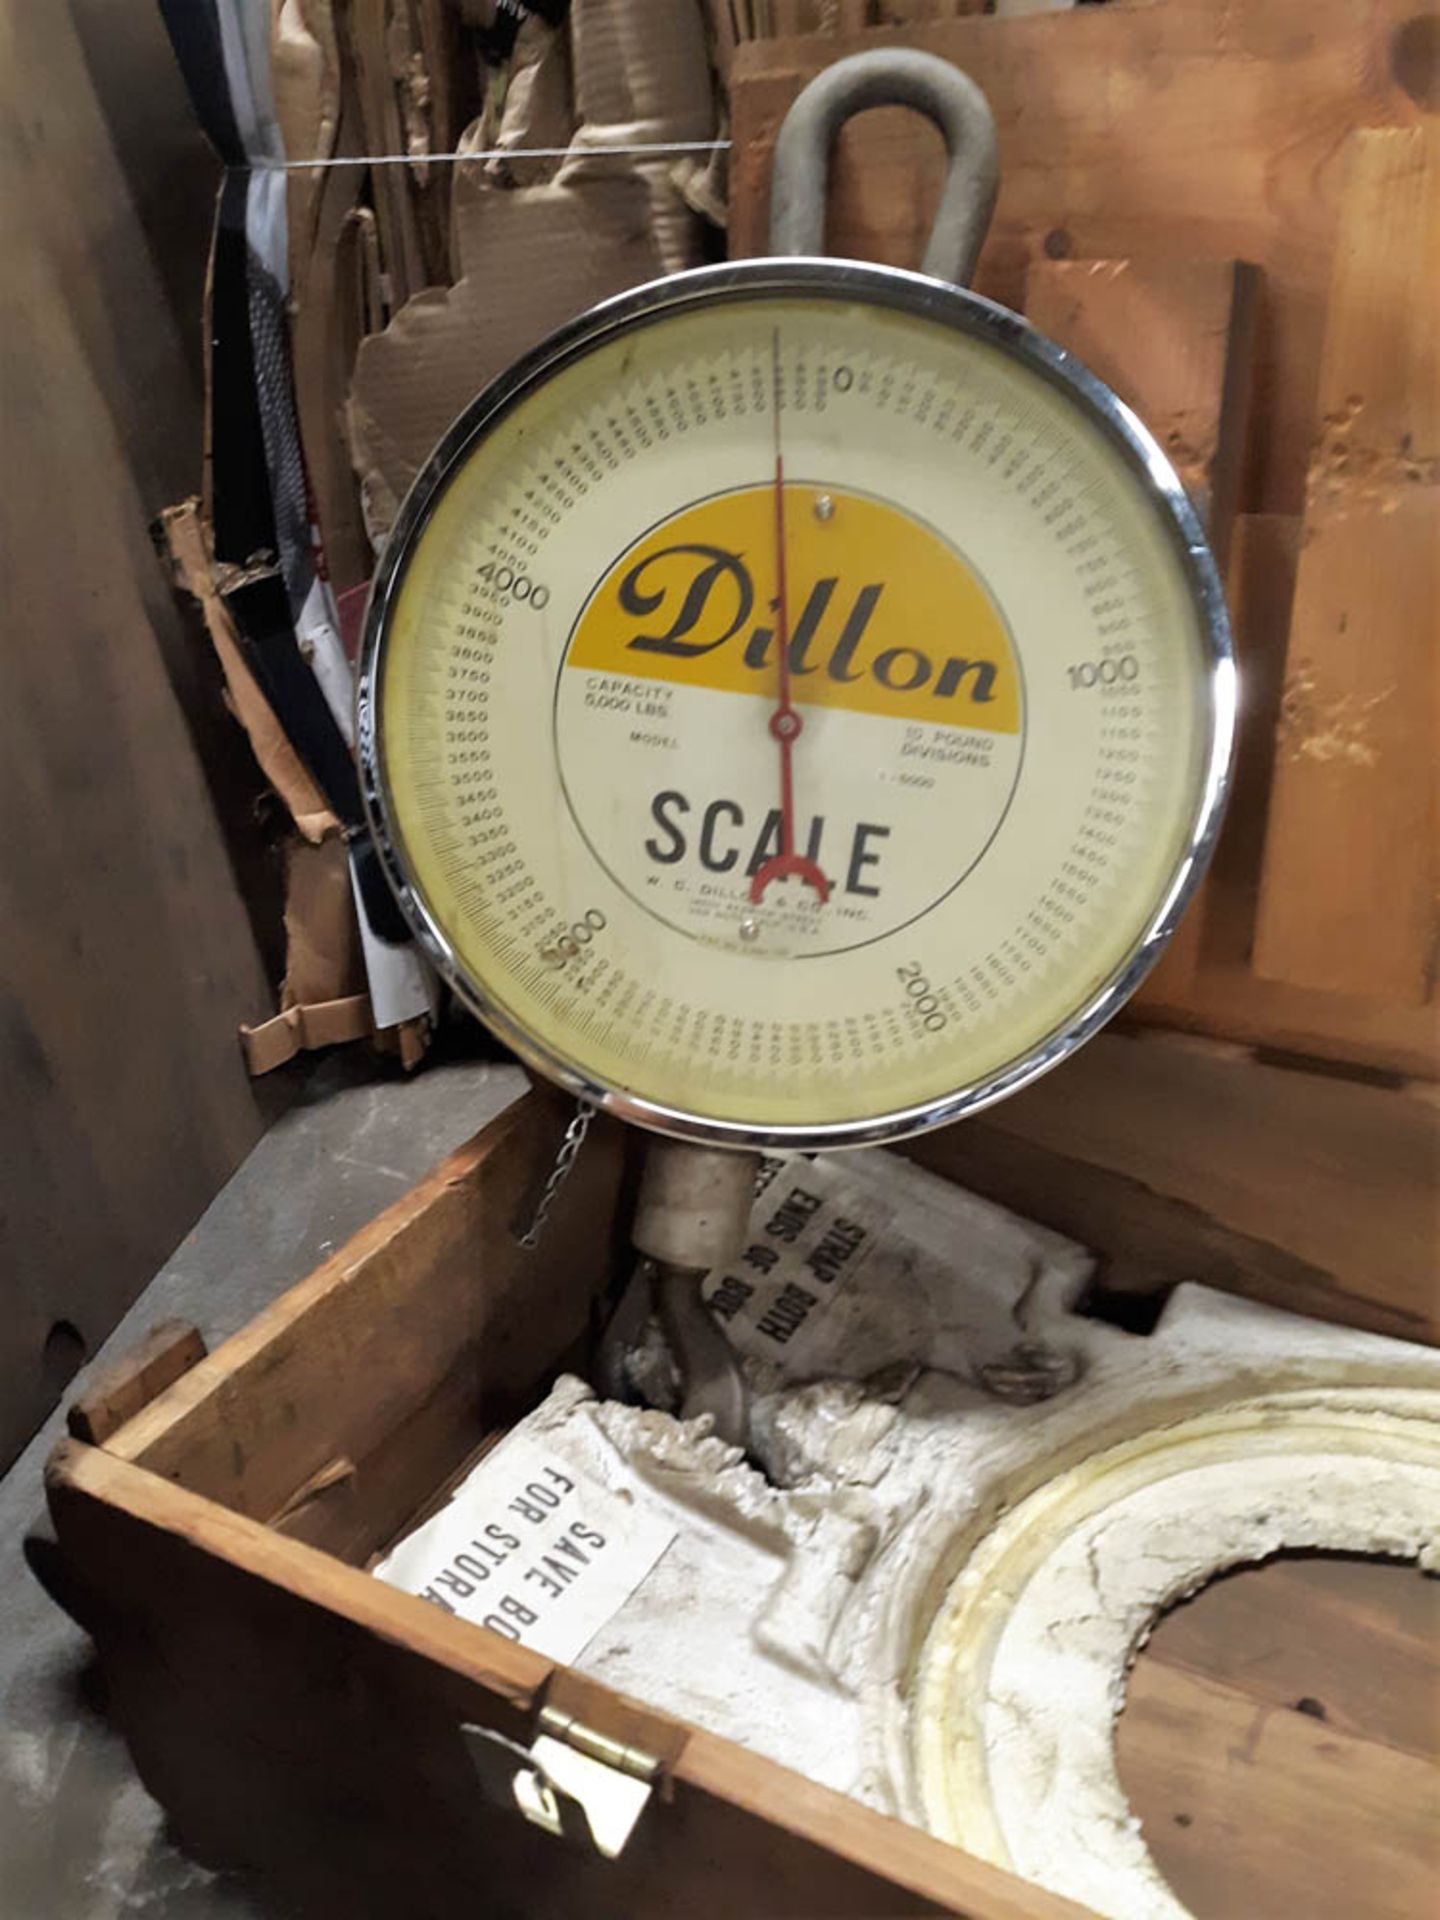 DILLION 5,000# CRANE SCALE, STORED IN ITS ORIGINAL CRATE - Image 2 of 2